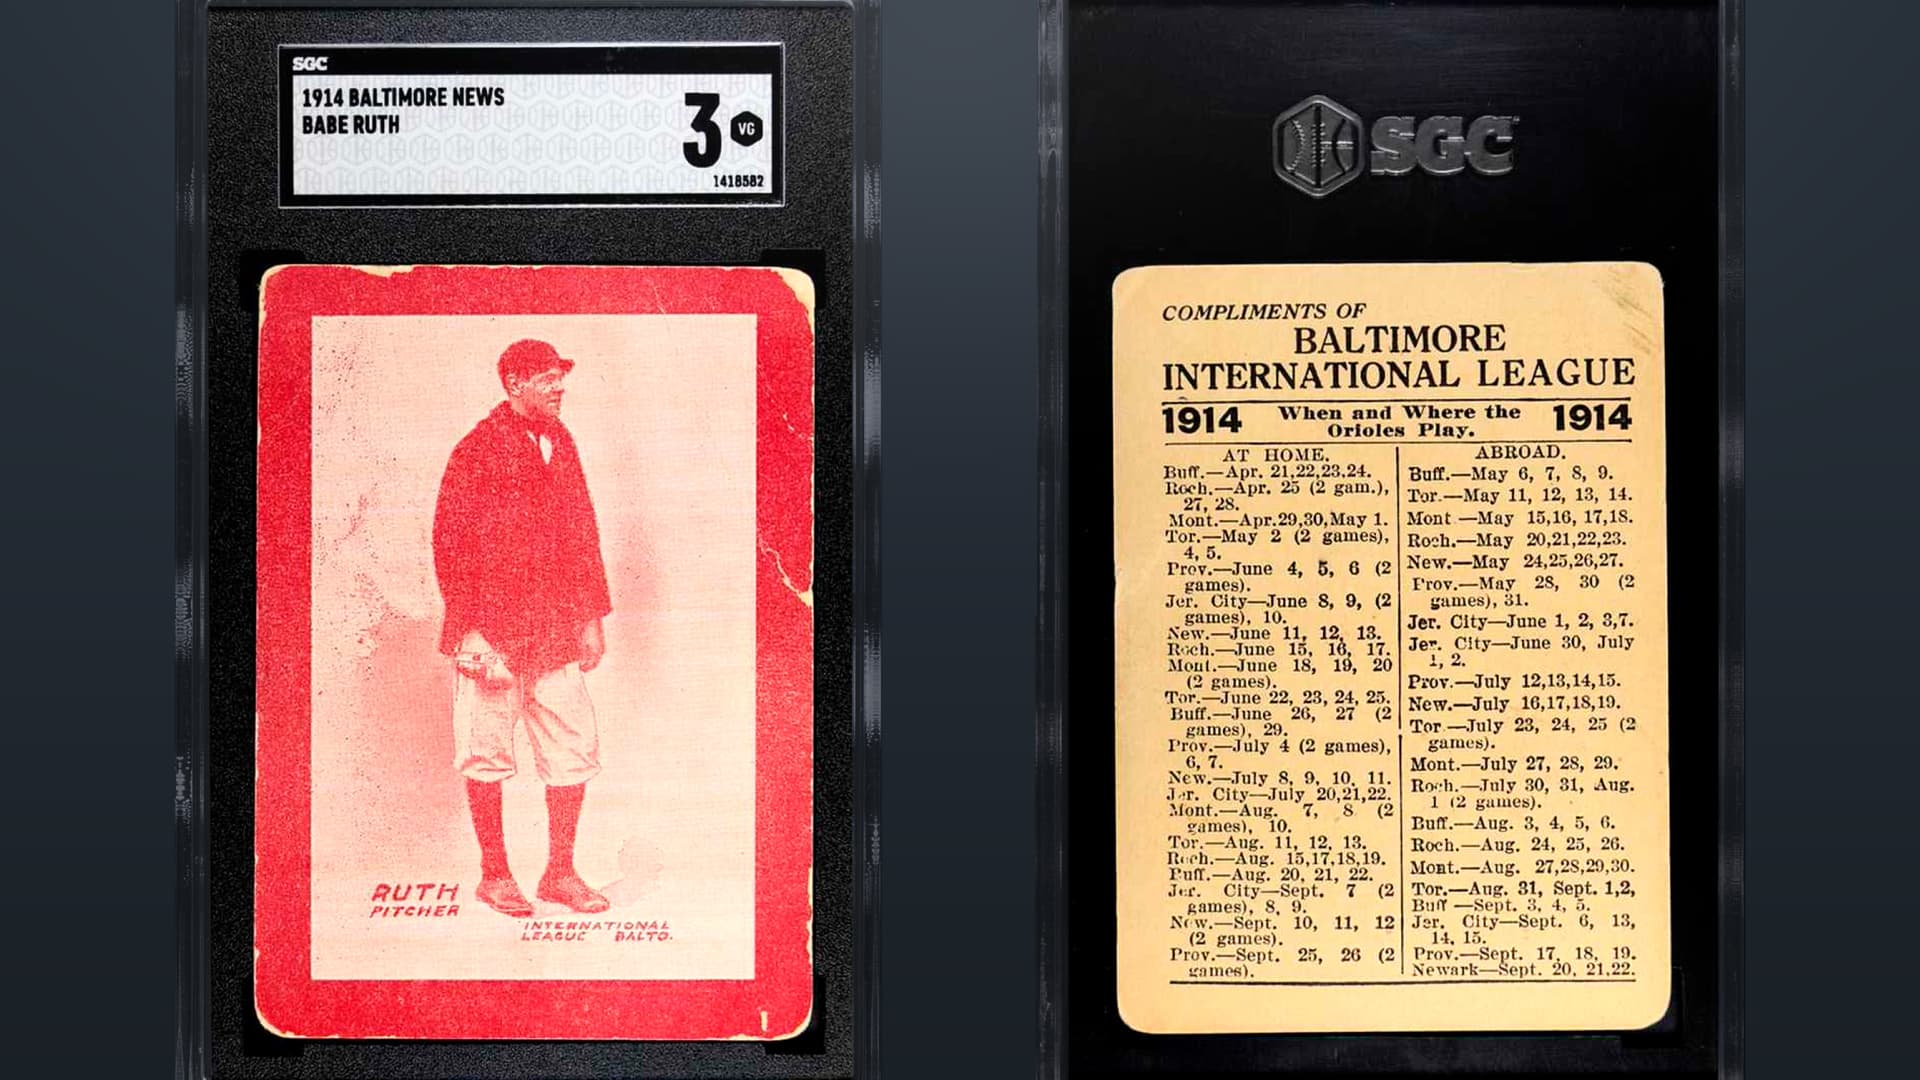 Mickey Mantle baseball card sells for record $5.2 million